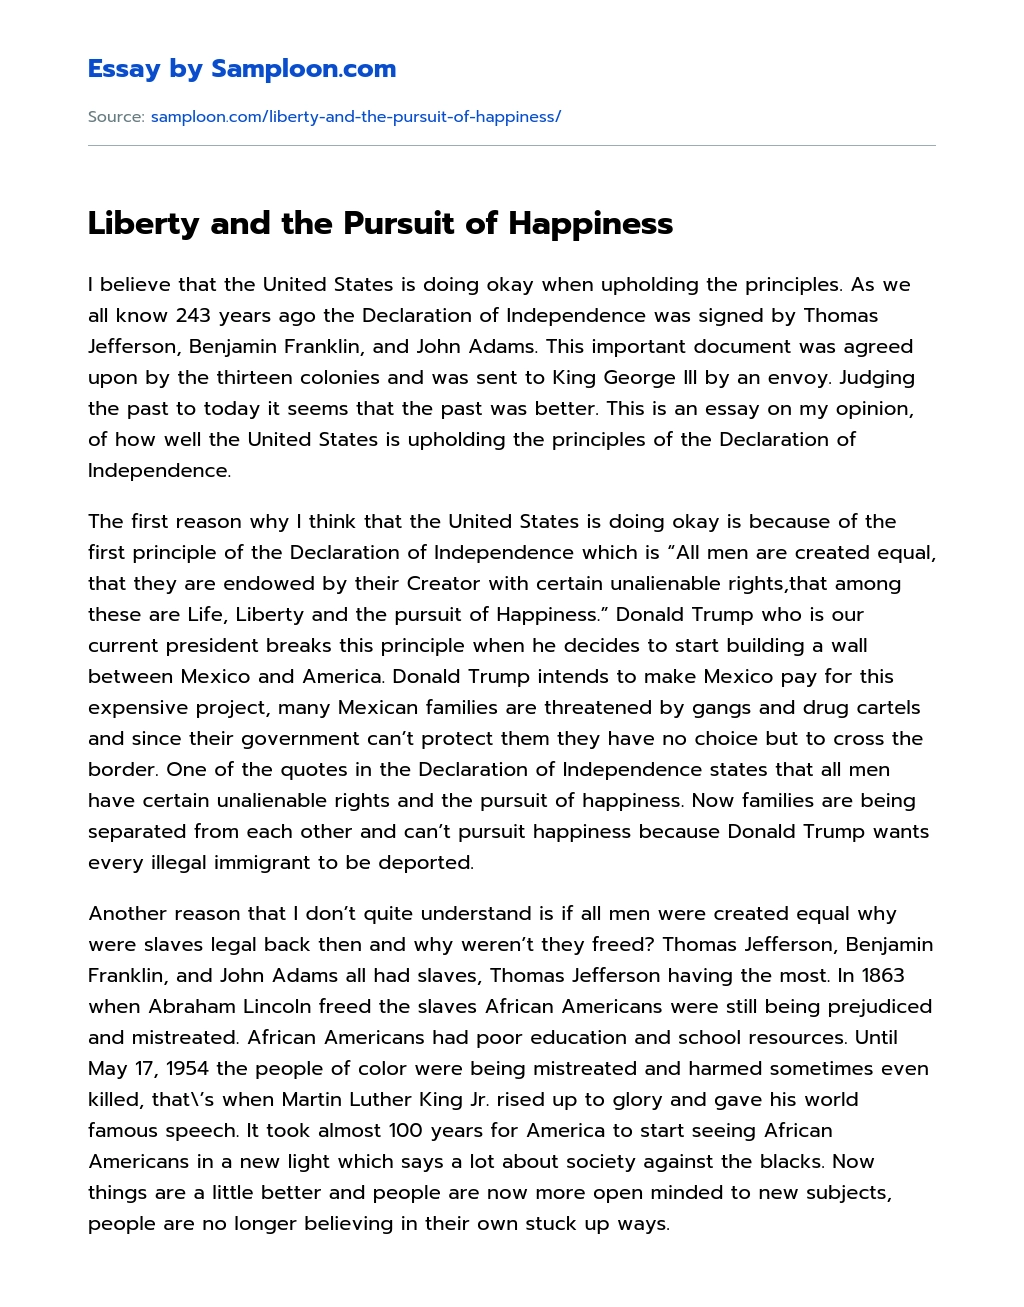 Liberty and the Pursuit of Happiness essay